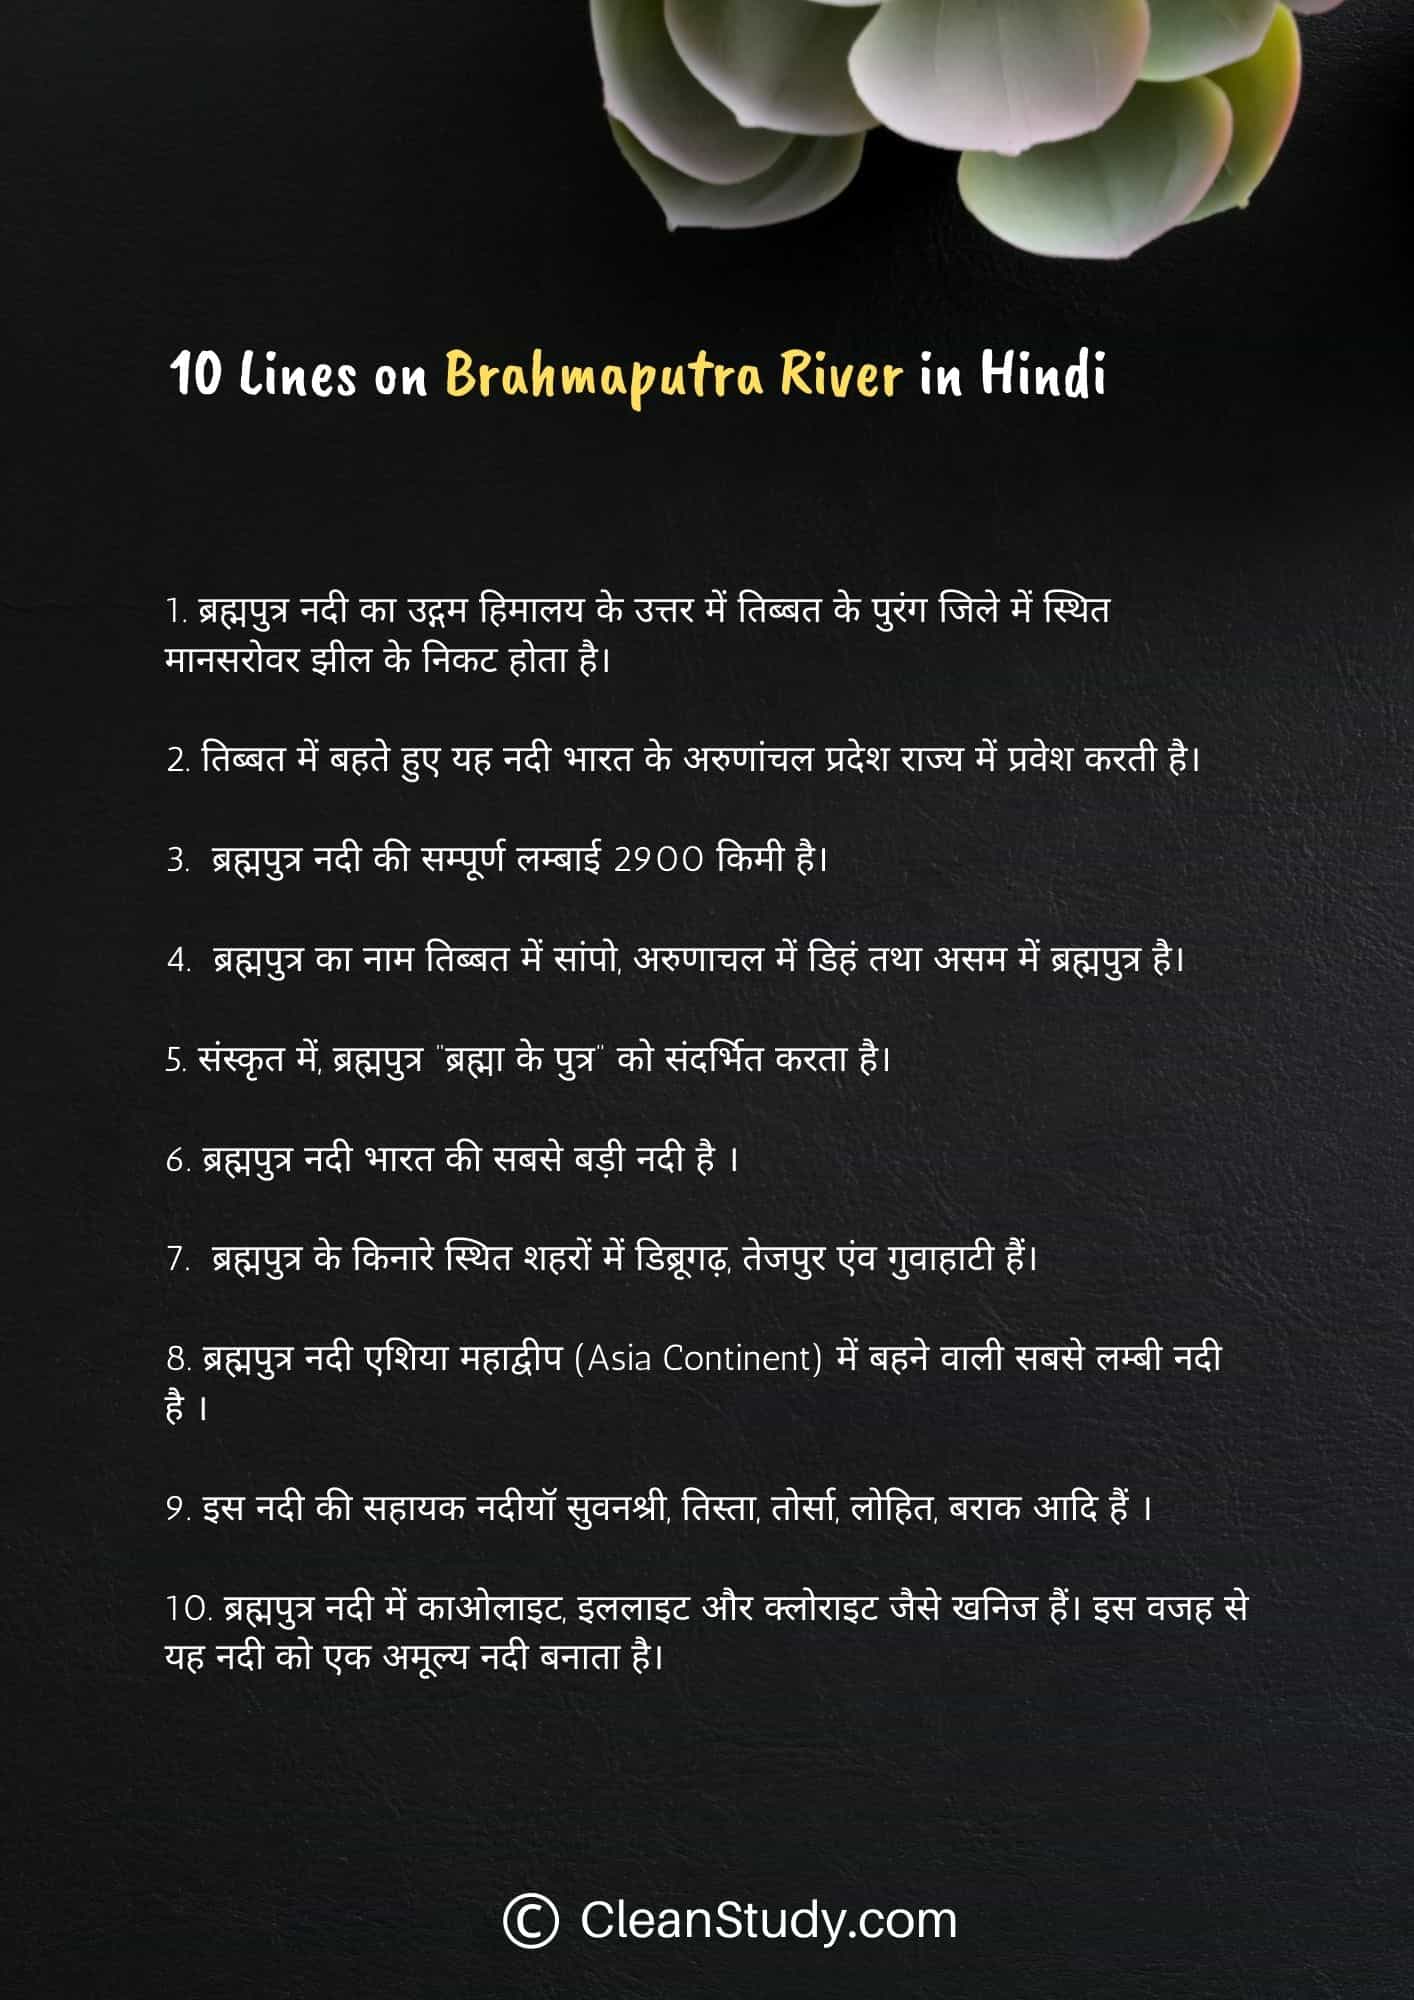 10 Lines on Brahmaputra River in Hindi